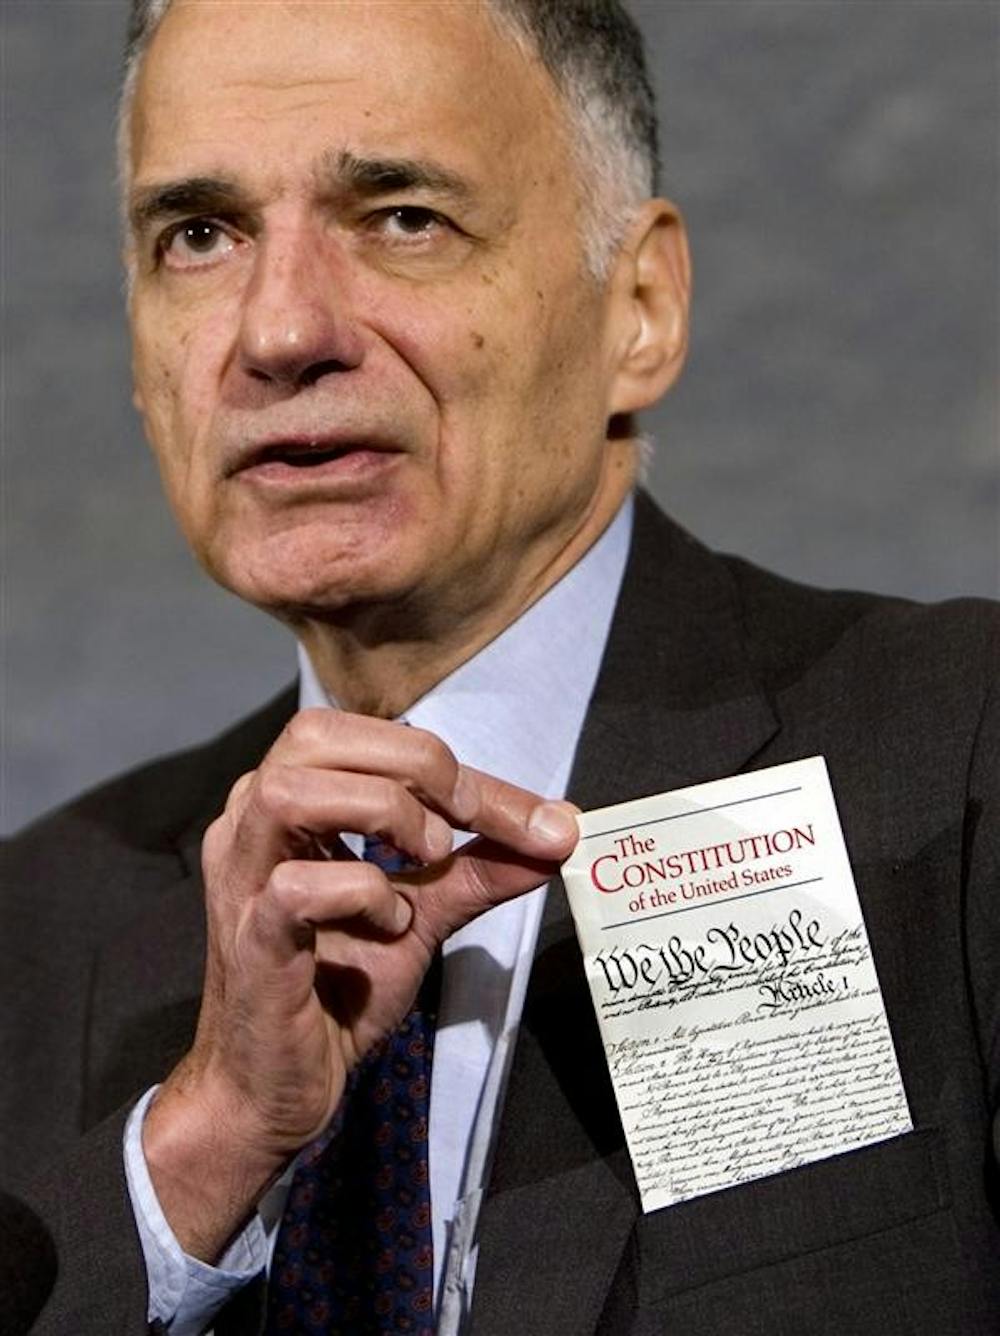 Independent presidential candidate Ralph Nader shows a copy of the U.S. Constitution during a news conference on Sept. 10 at the National Press Club in Washington.